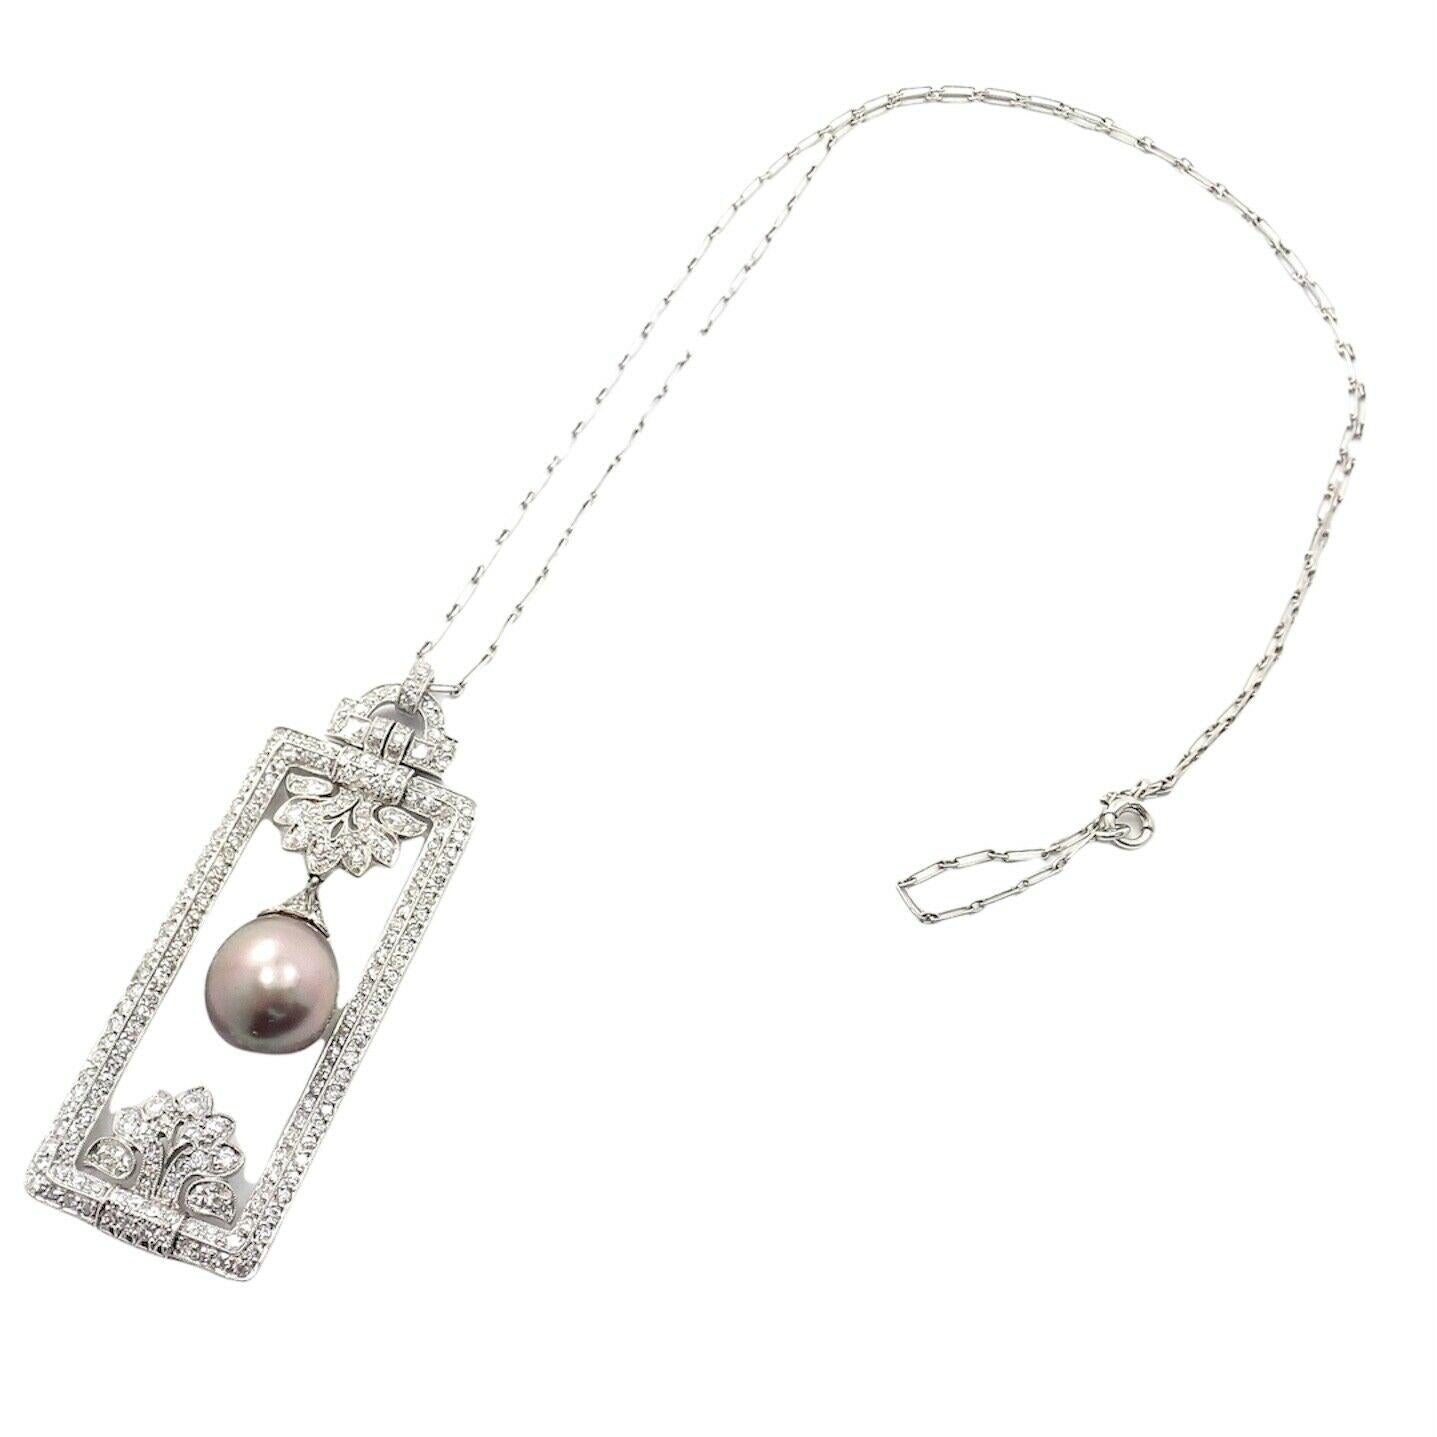 Platinum Diamond Tahitian South Sea Pearl Vintage Pendant Necklace by Tiffany & Co. 
With 1 Tear Drop South Sea Tahitian Pearl with high luster. 10mm x 10.75mm
Approximately 220 Round brilliant cut diamonds VS1 clarity, G color total weight approx.